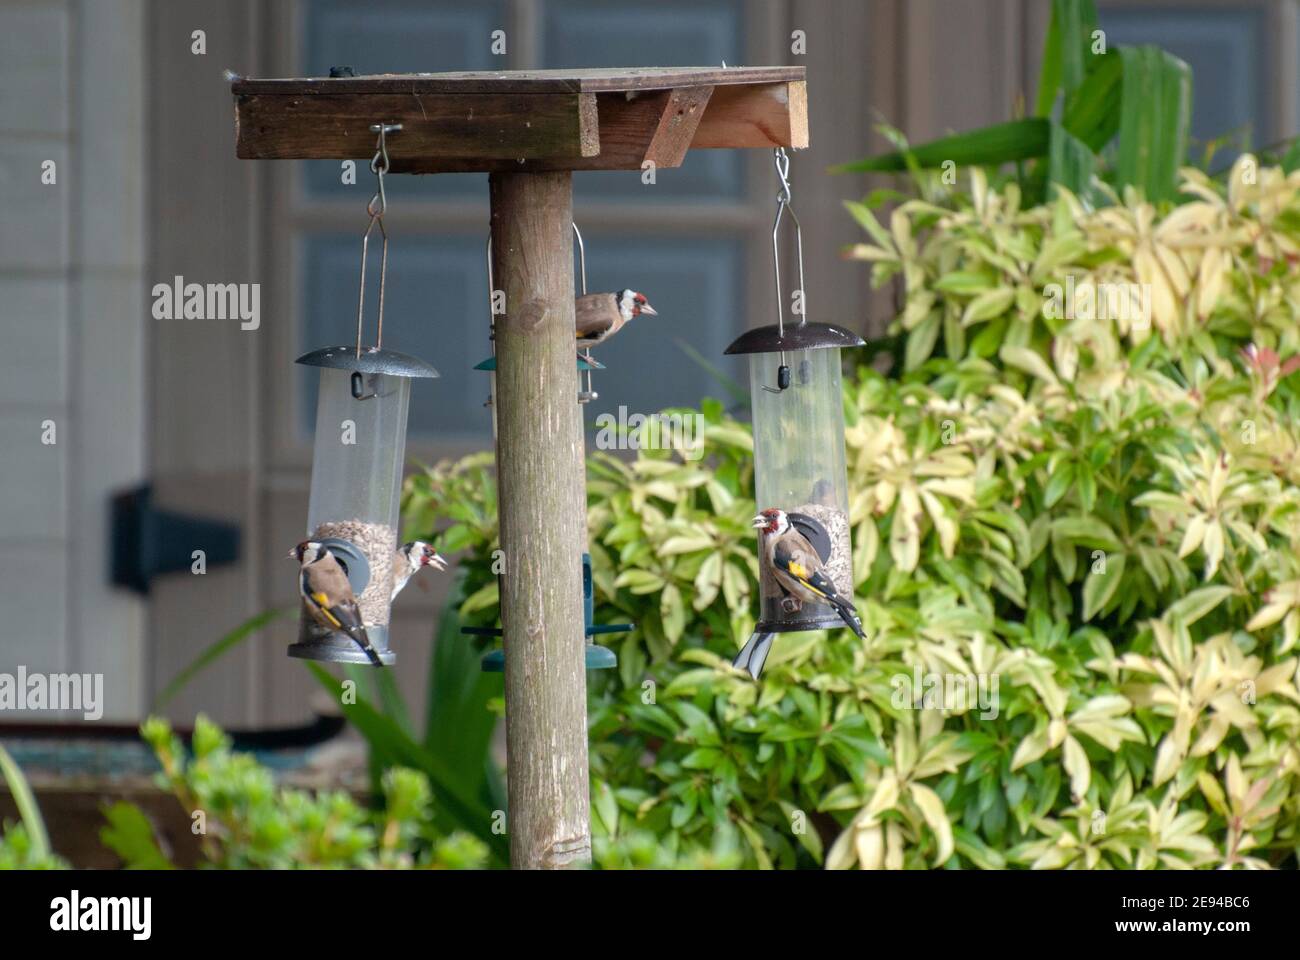 Four Goldfinches Feeding on Sunflower Seed Hearts 4 small garden birds feathered friends goldfinch goldfinches carduelis carduelis finches feeding eat Stock Photo